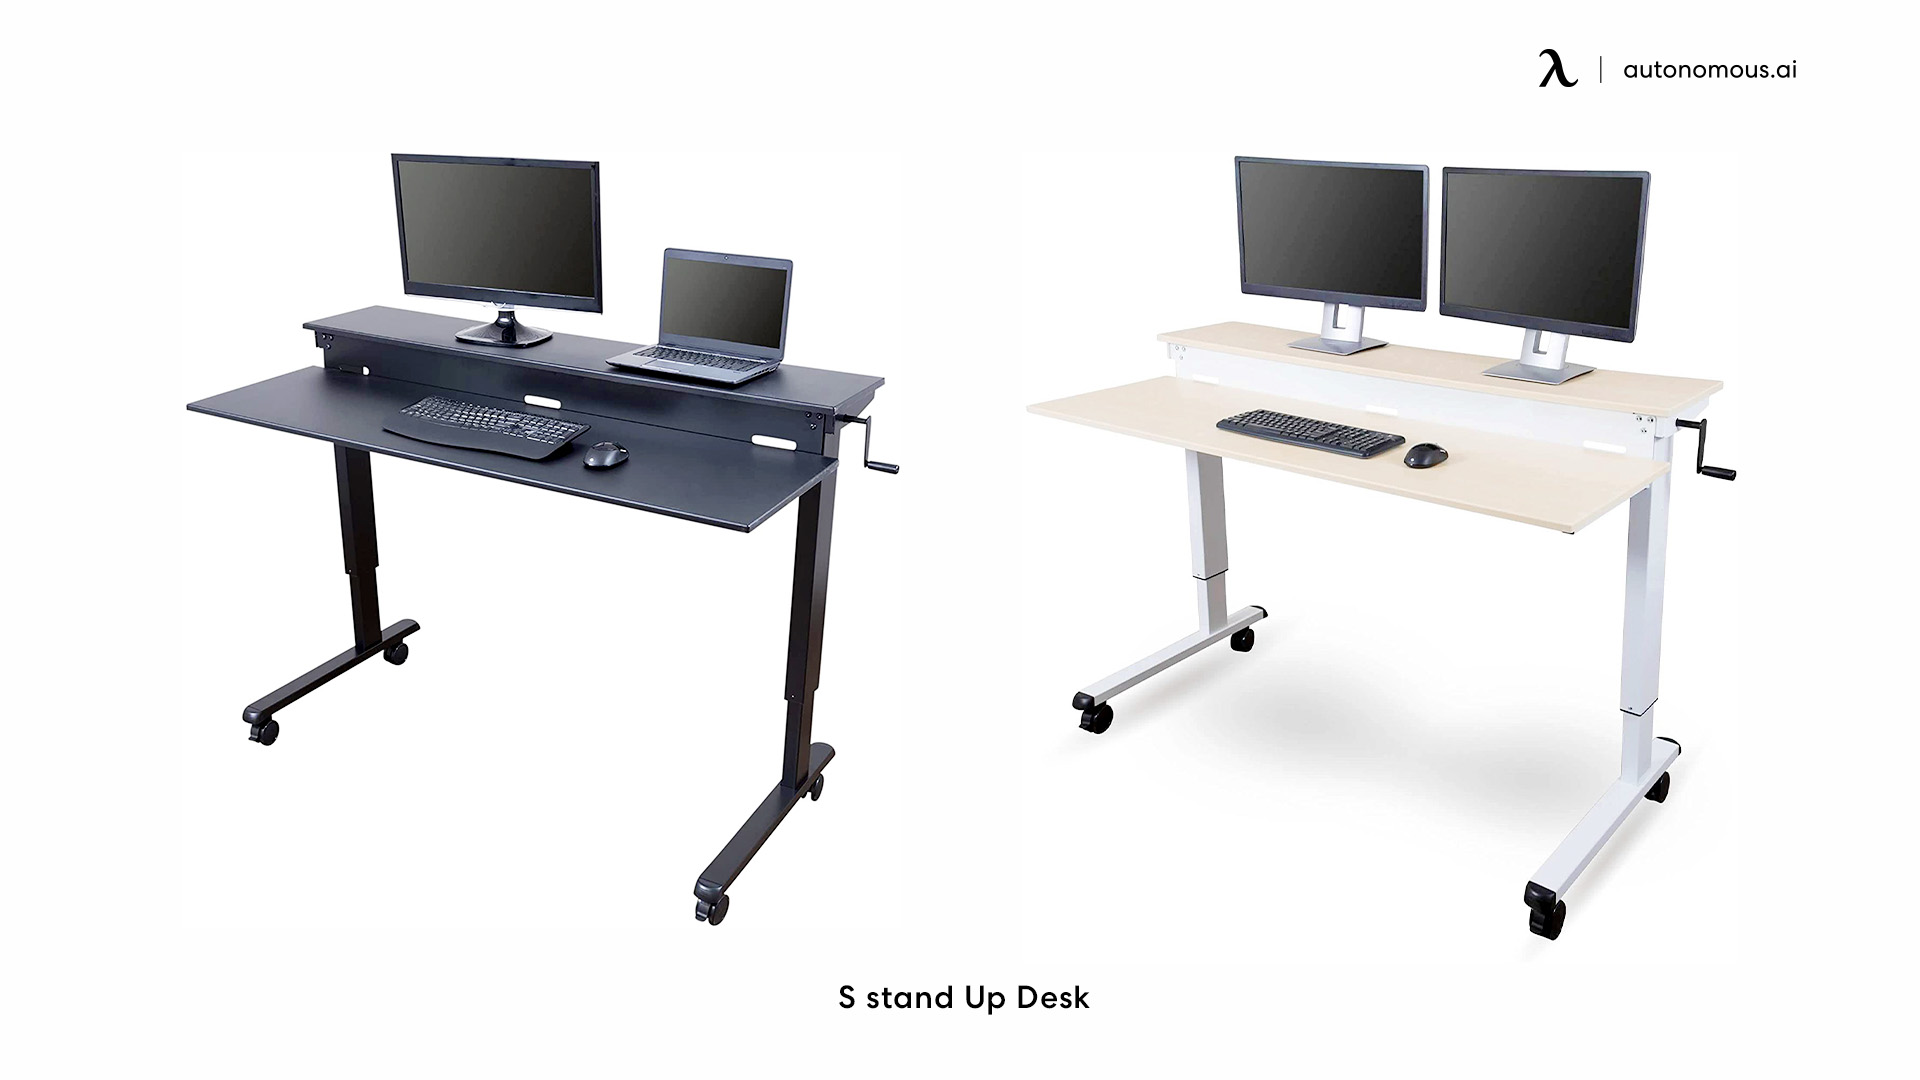 S Stand Up Desk